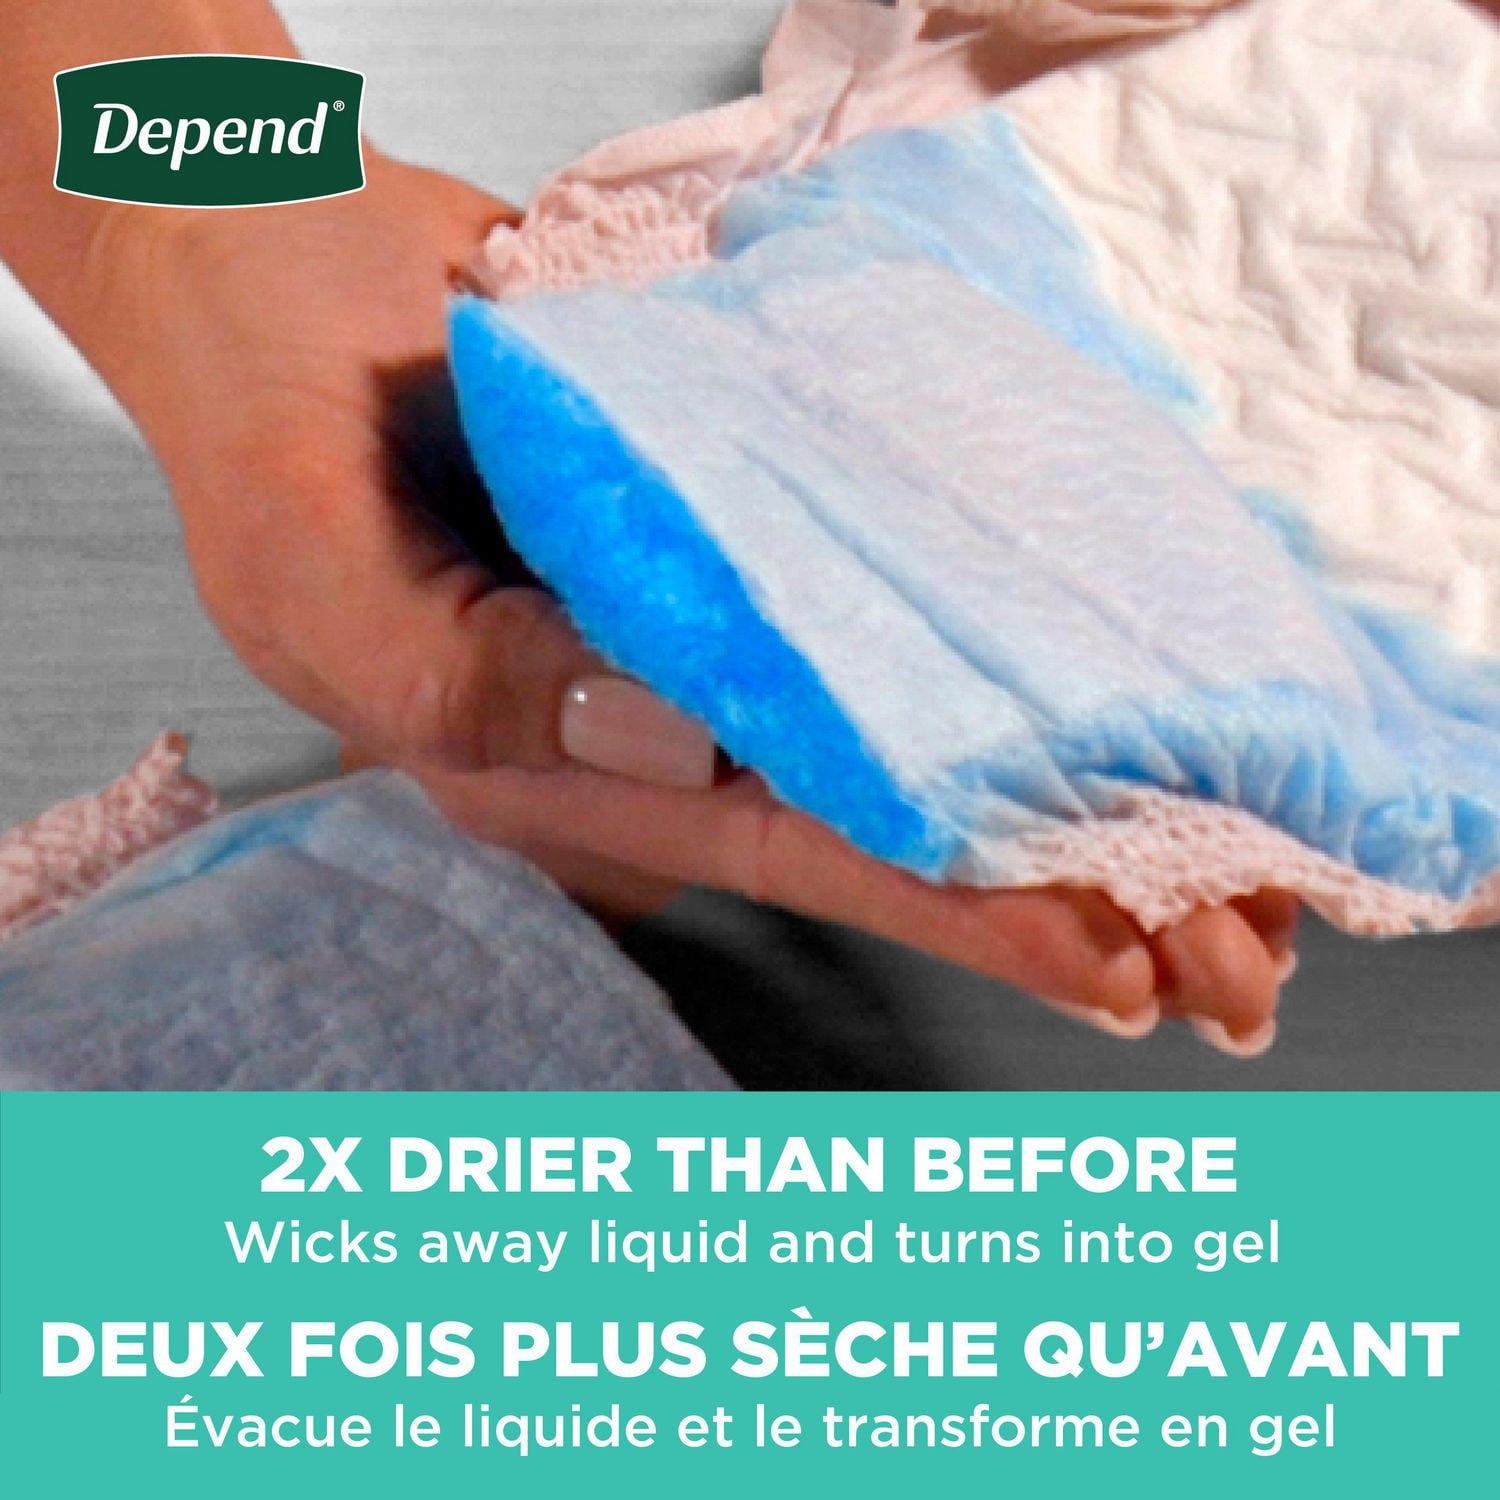 Depend Fit-Flex Underwear for Women Maximum Absorbency S, 19 Count -  , Health & Beauty, Personal Care